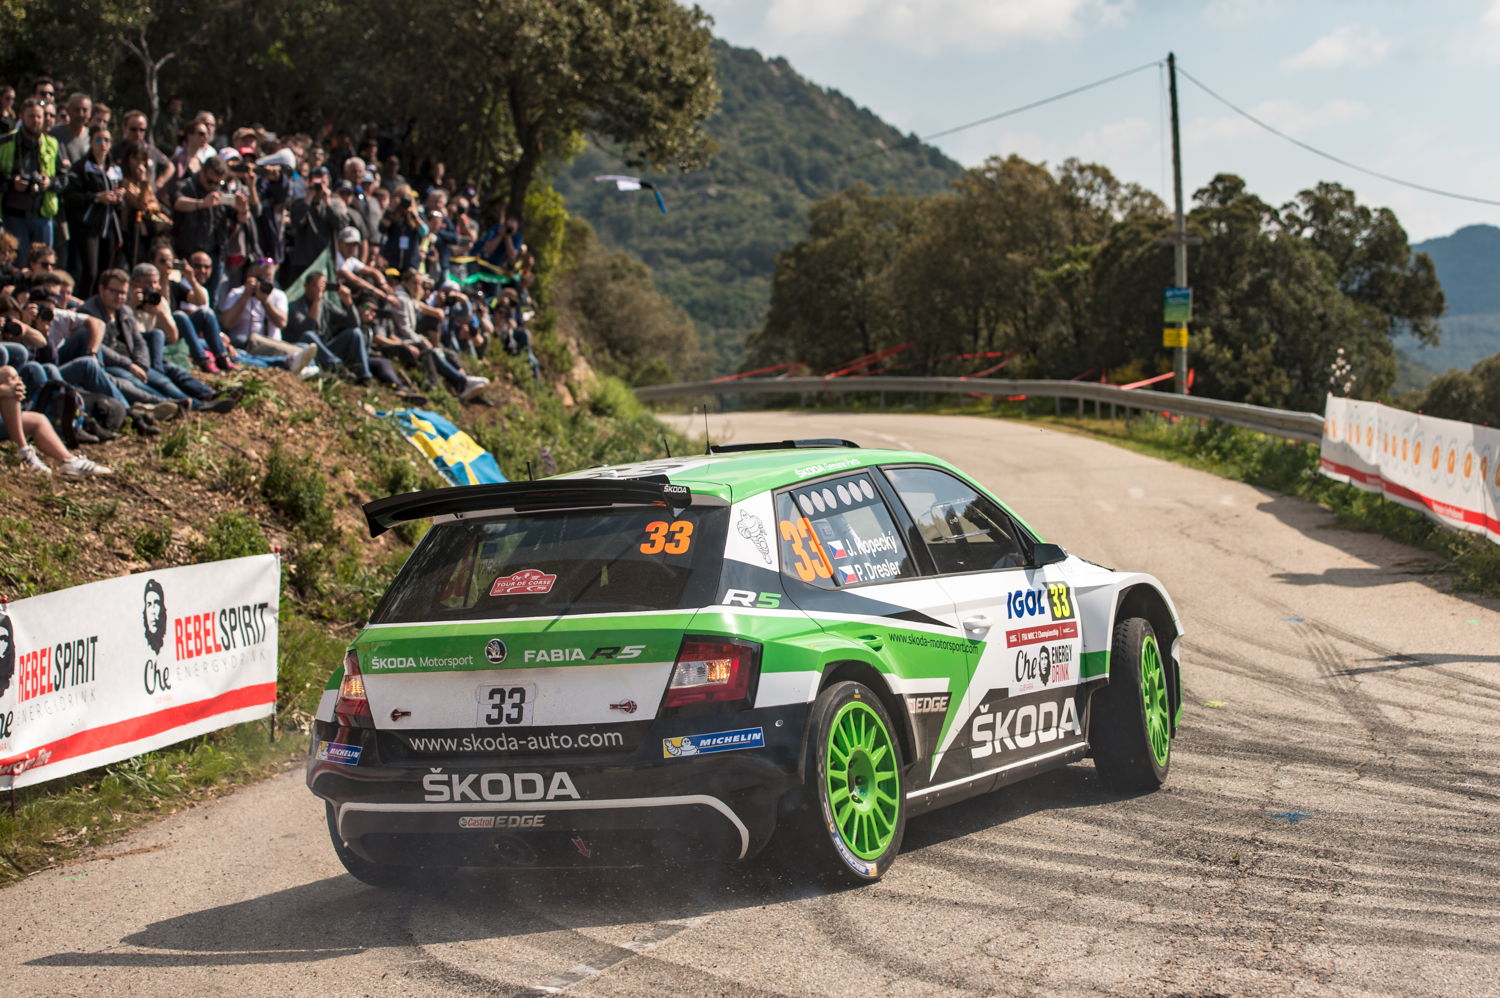 Jan Kopecký and co-driver Pavel Dresler (CZE/CZE), driving a ŠKODA FABIA R5, want to repeat their victory from 2015 at ADAC Rallye Deutschland